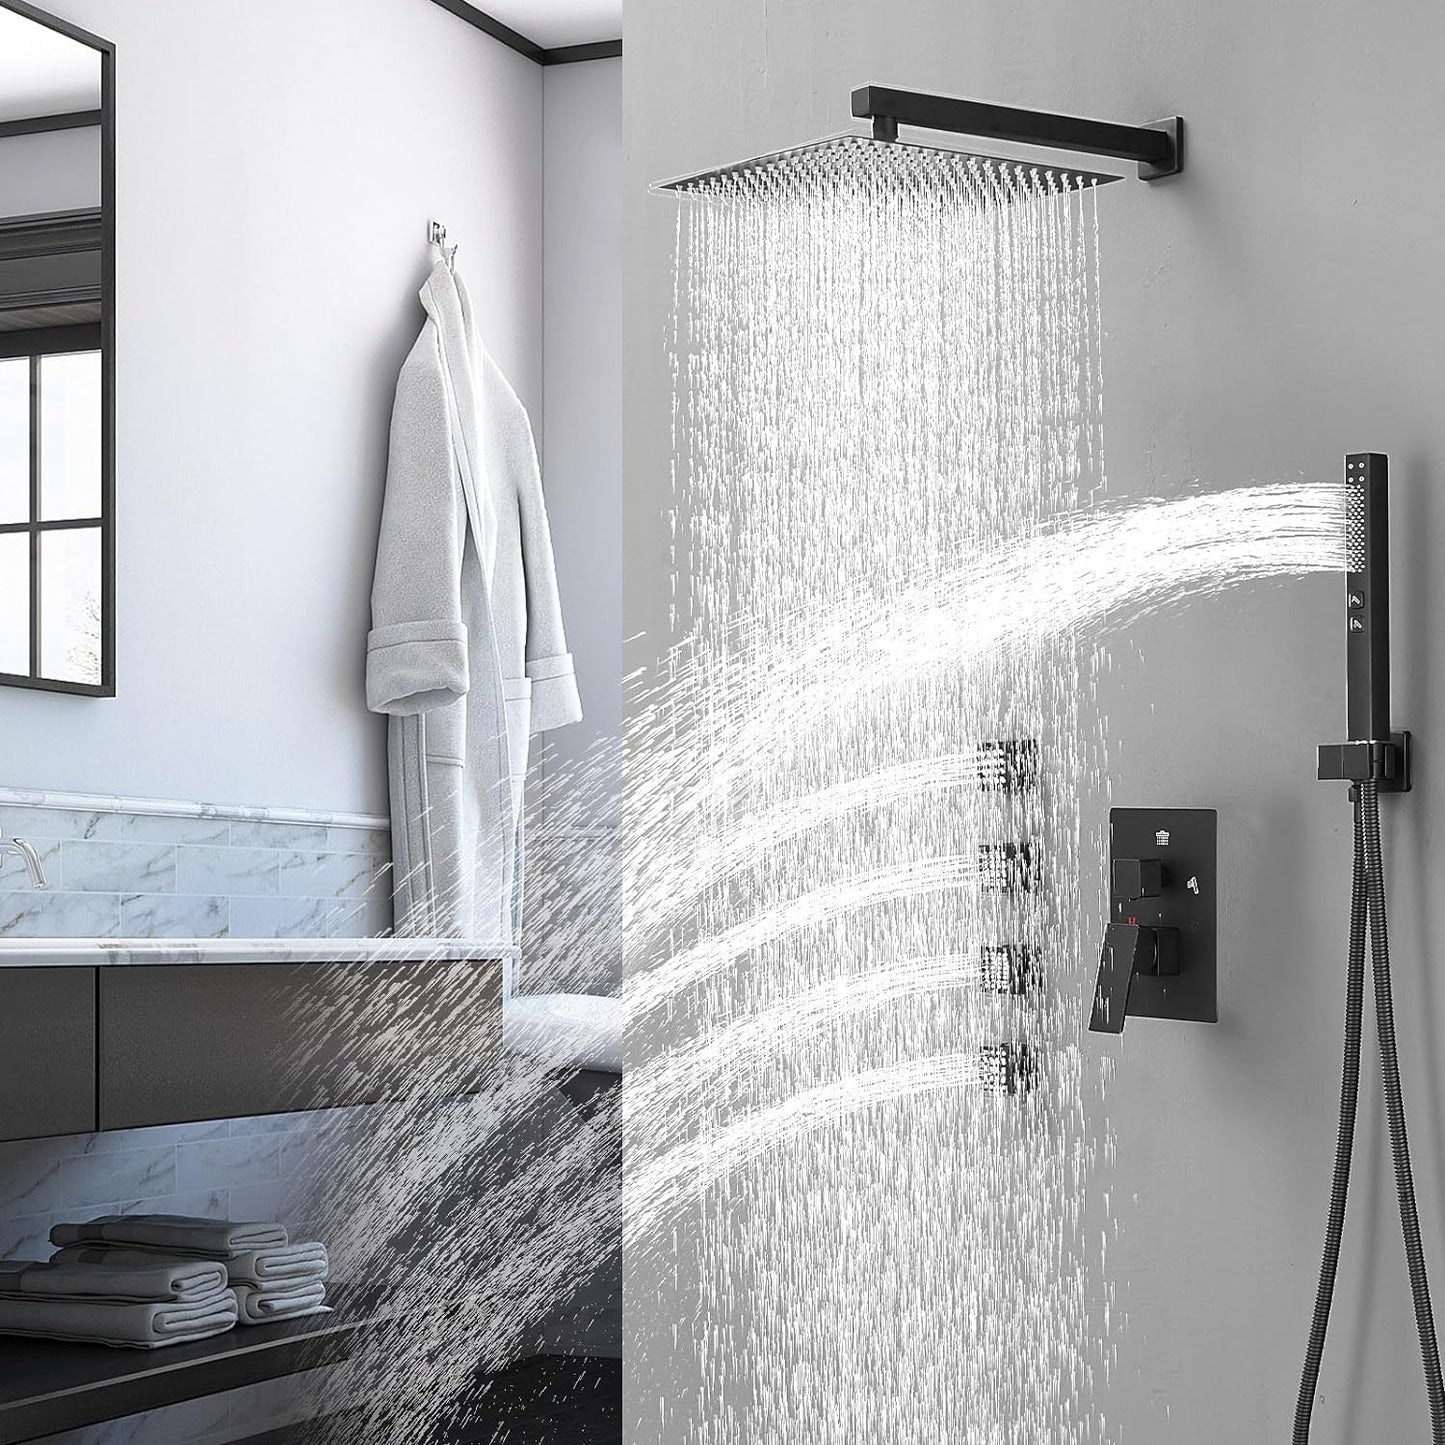 RUMOSE Rainfall Shower System with 4 Full Body Jet 4 Mode Shower Faucet Set with 12 Inch Rain Shower Head and 2 in 1 Handheld Spray, Matte Black Brass Shower Jet Shower Fixtures, Wall Mounted